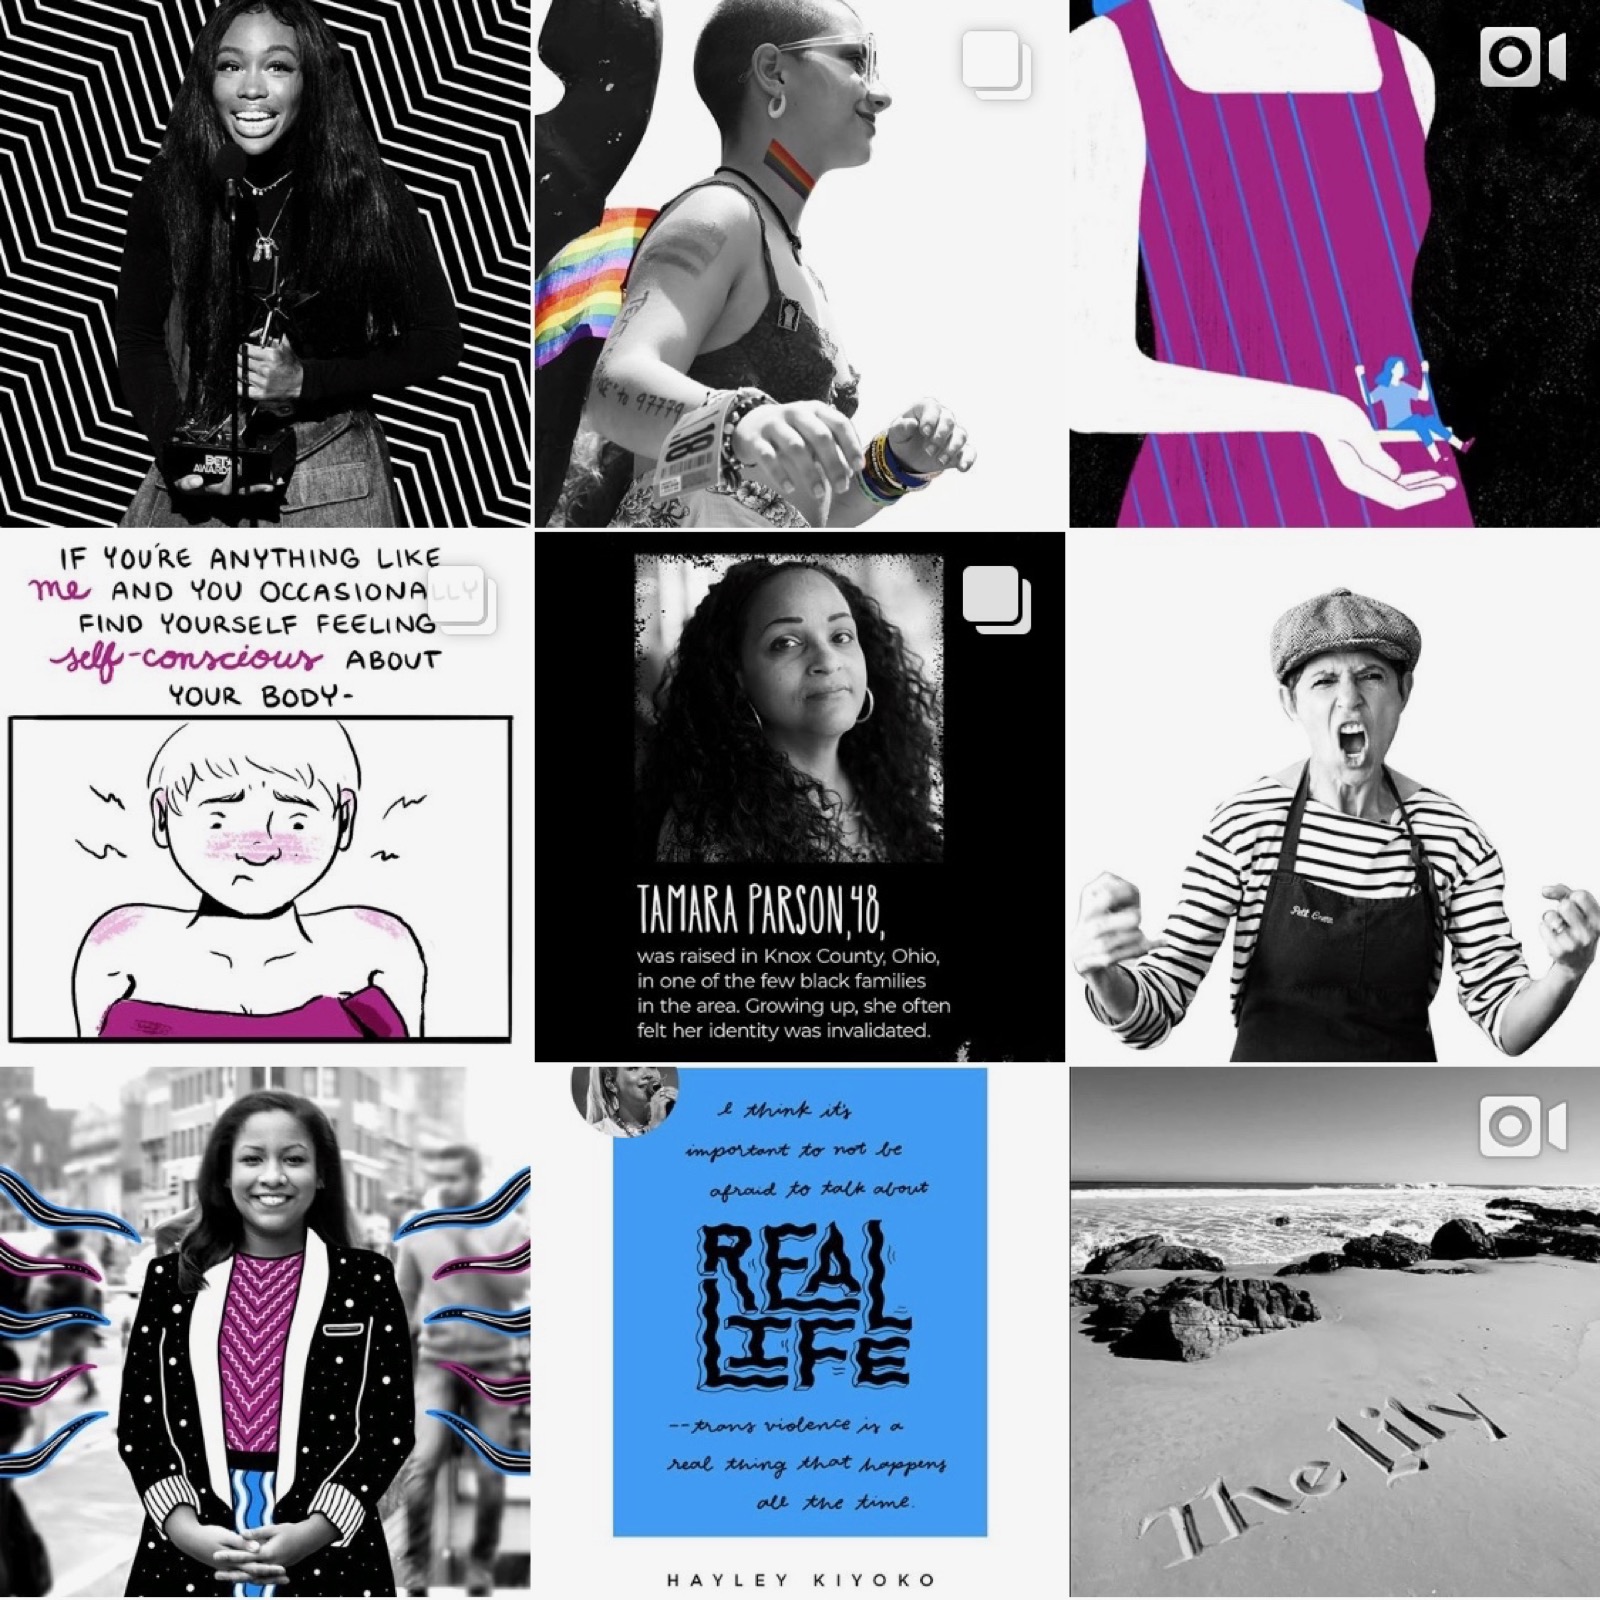 The Lily's Instagram grid, showing the clear black/white alternation